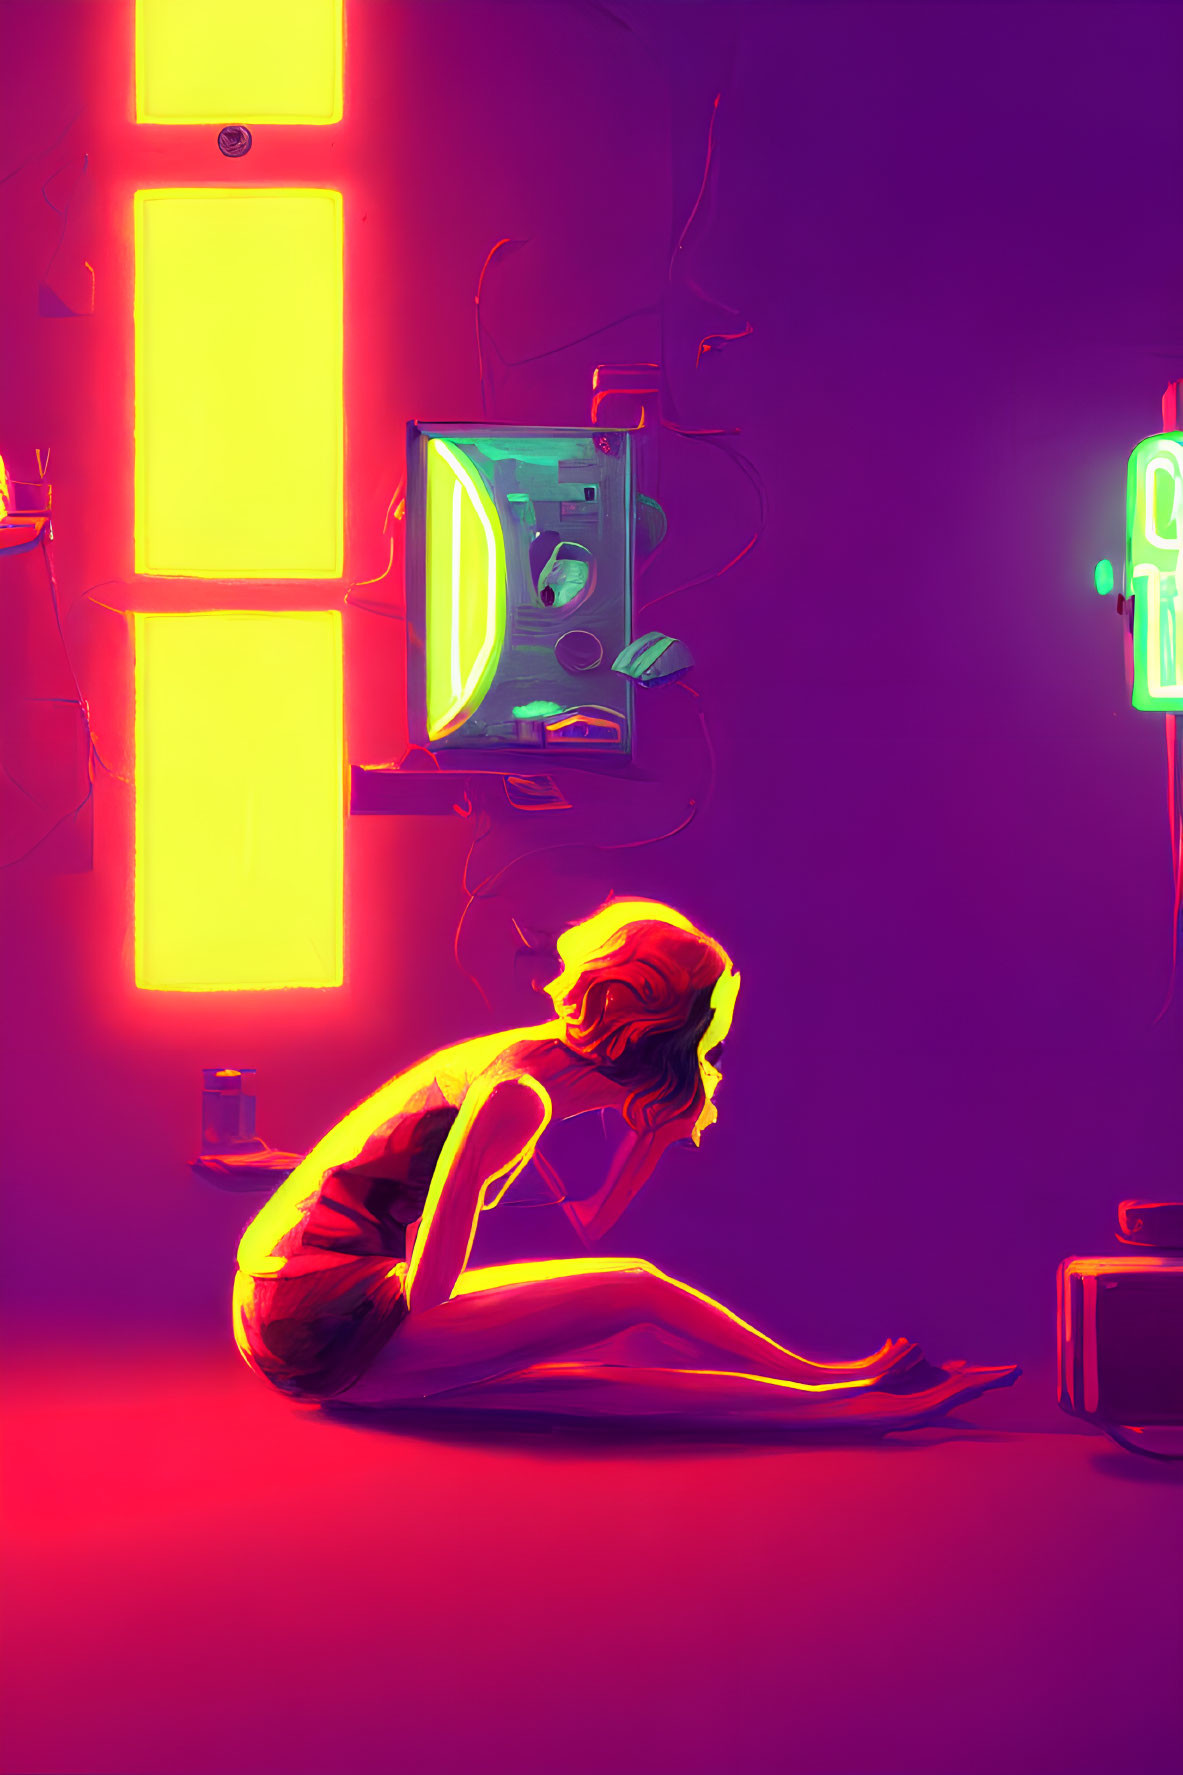 Woman sitting in neon-lit room with TV and signs